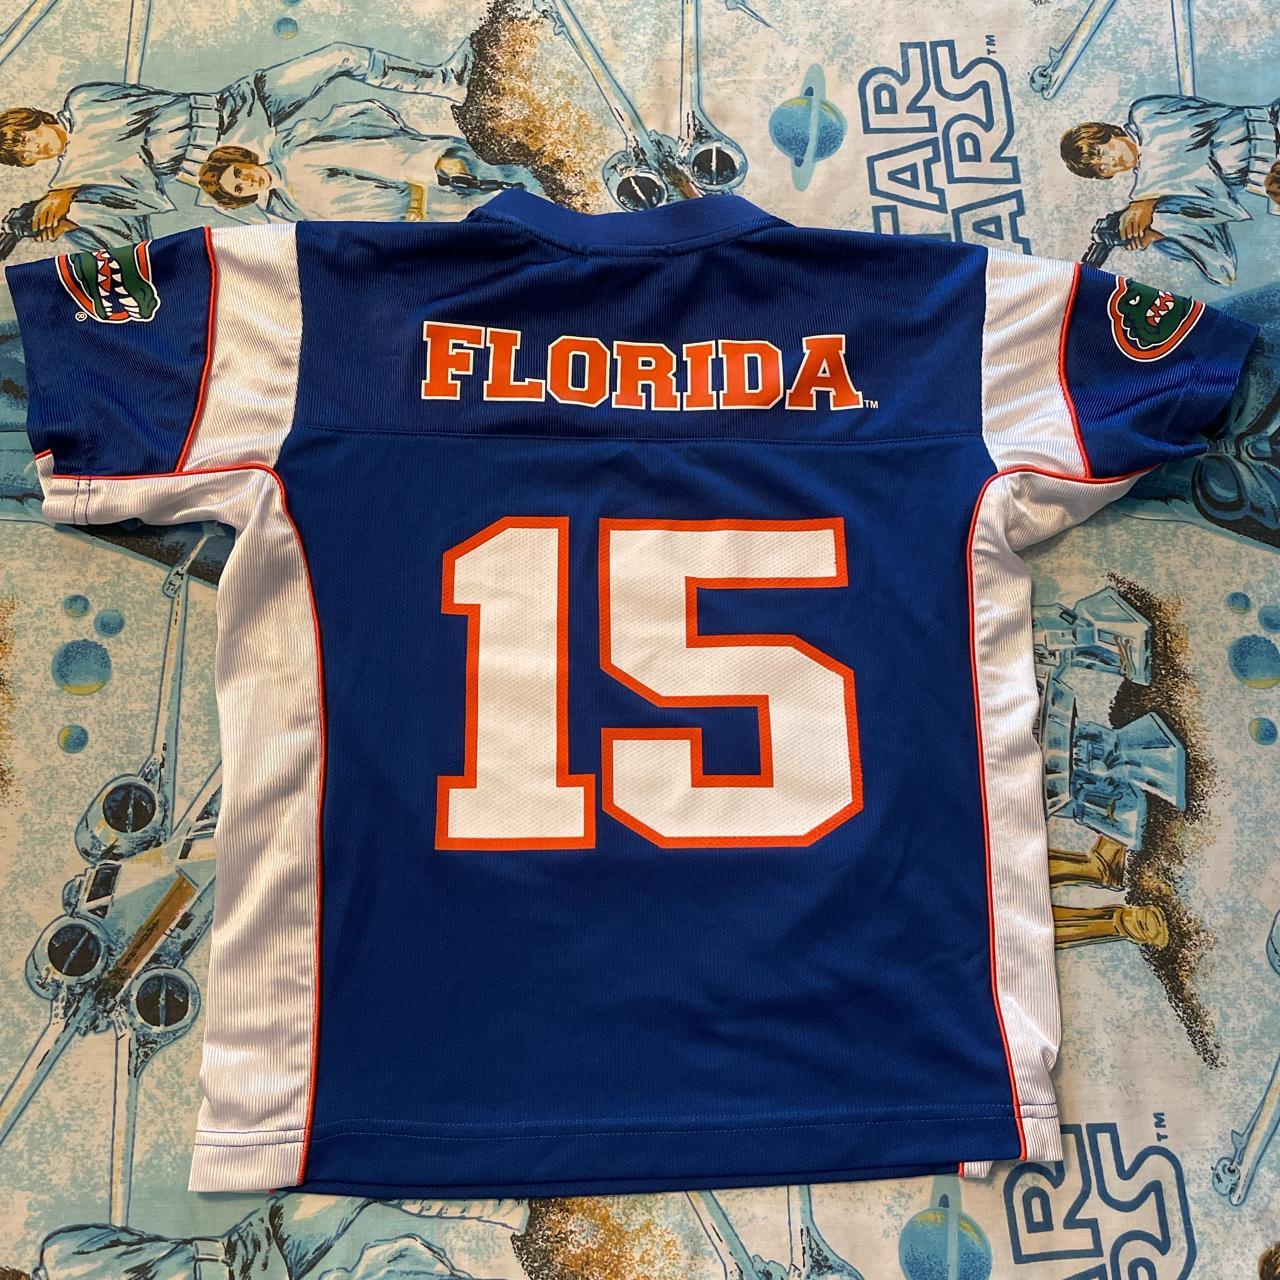 tim tebow jersey youth